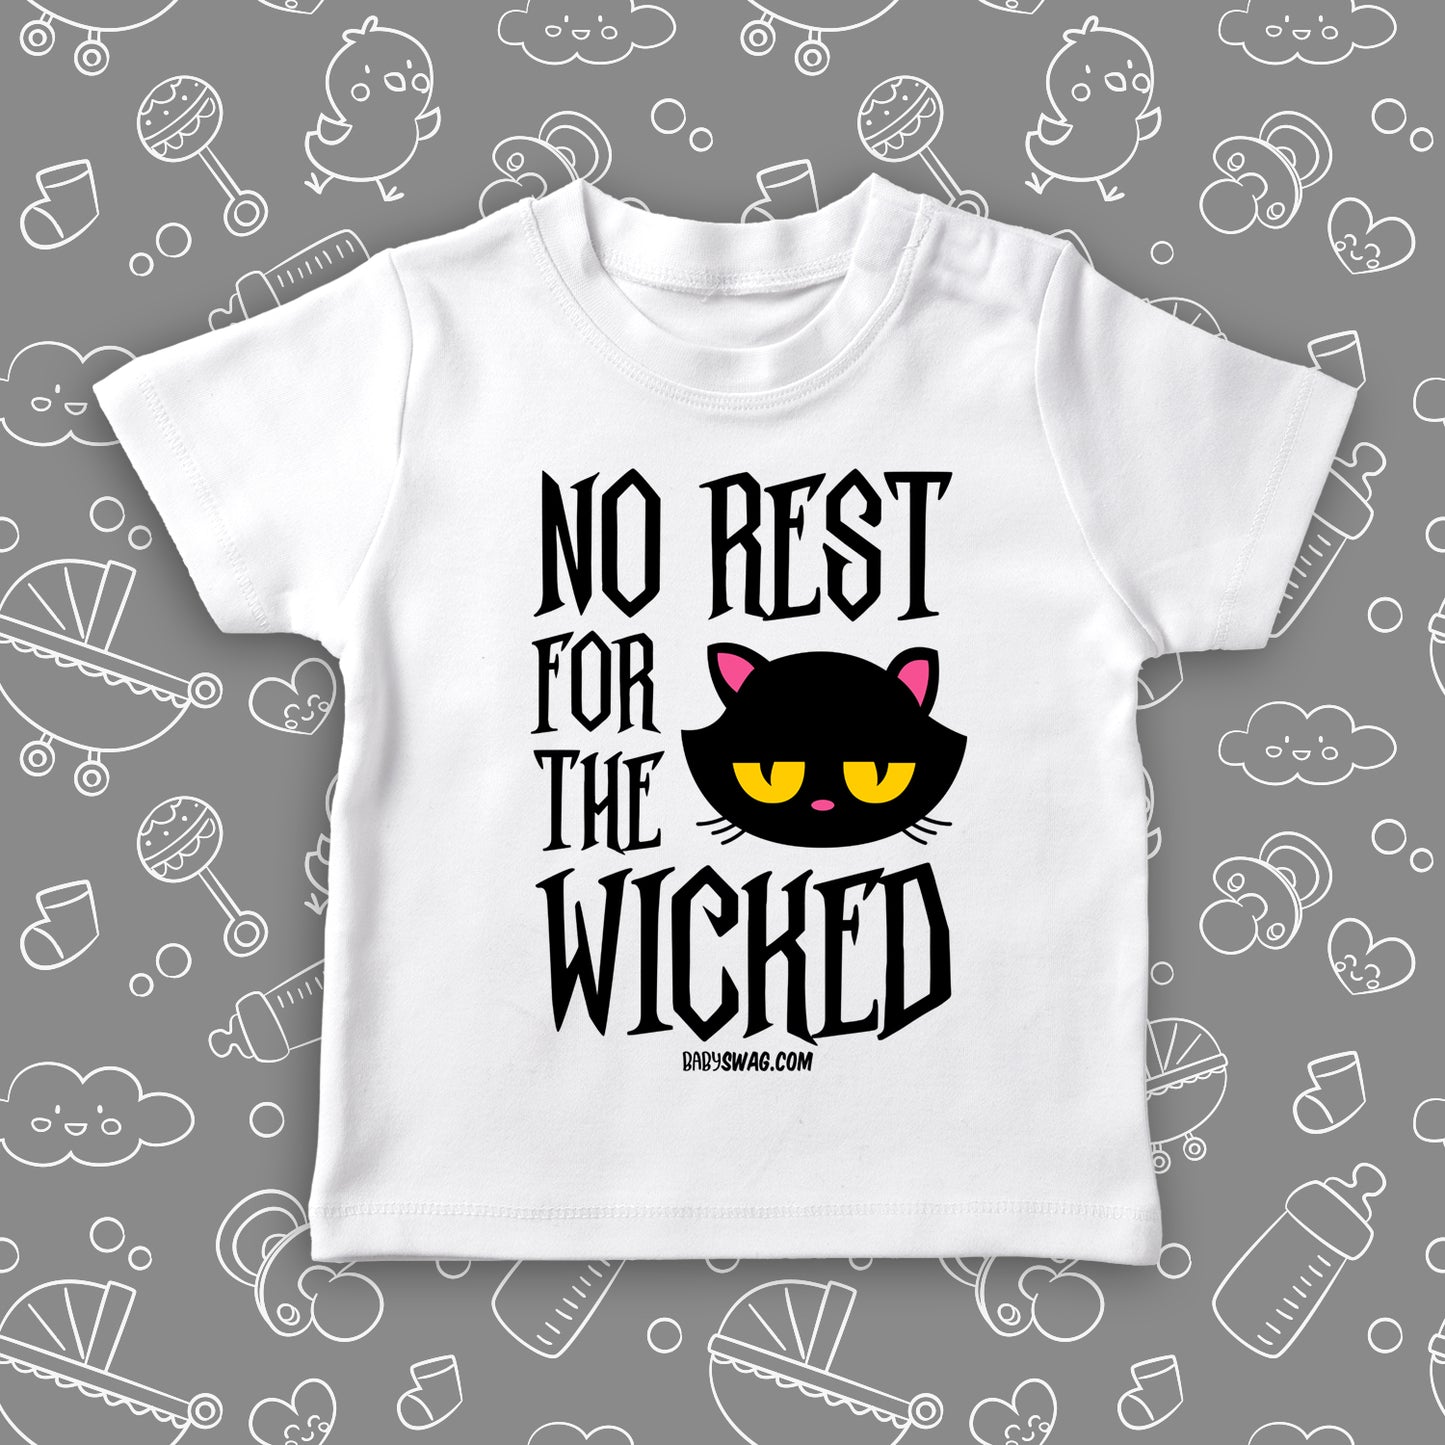 Funny toddler shirt with saying "No Rest For The Wicked" in white. 